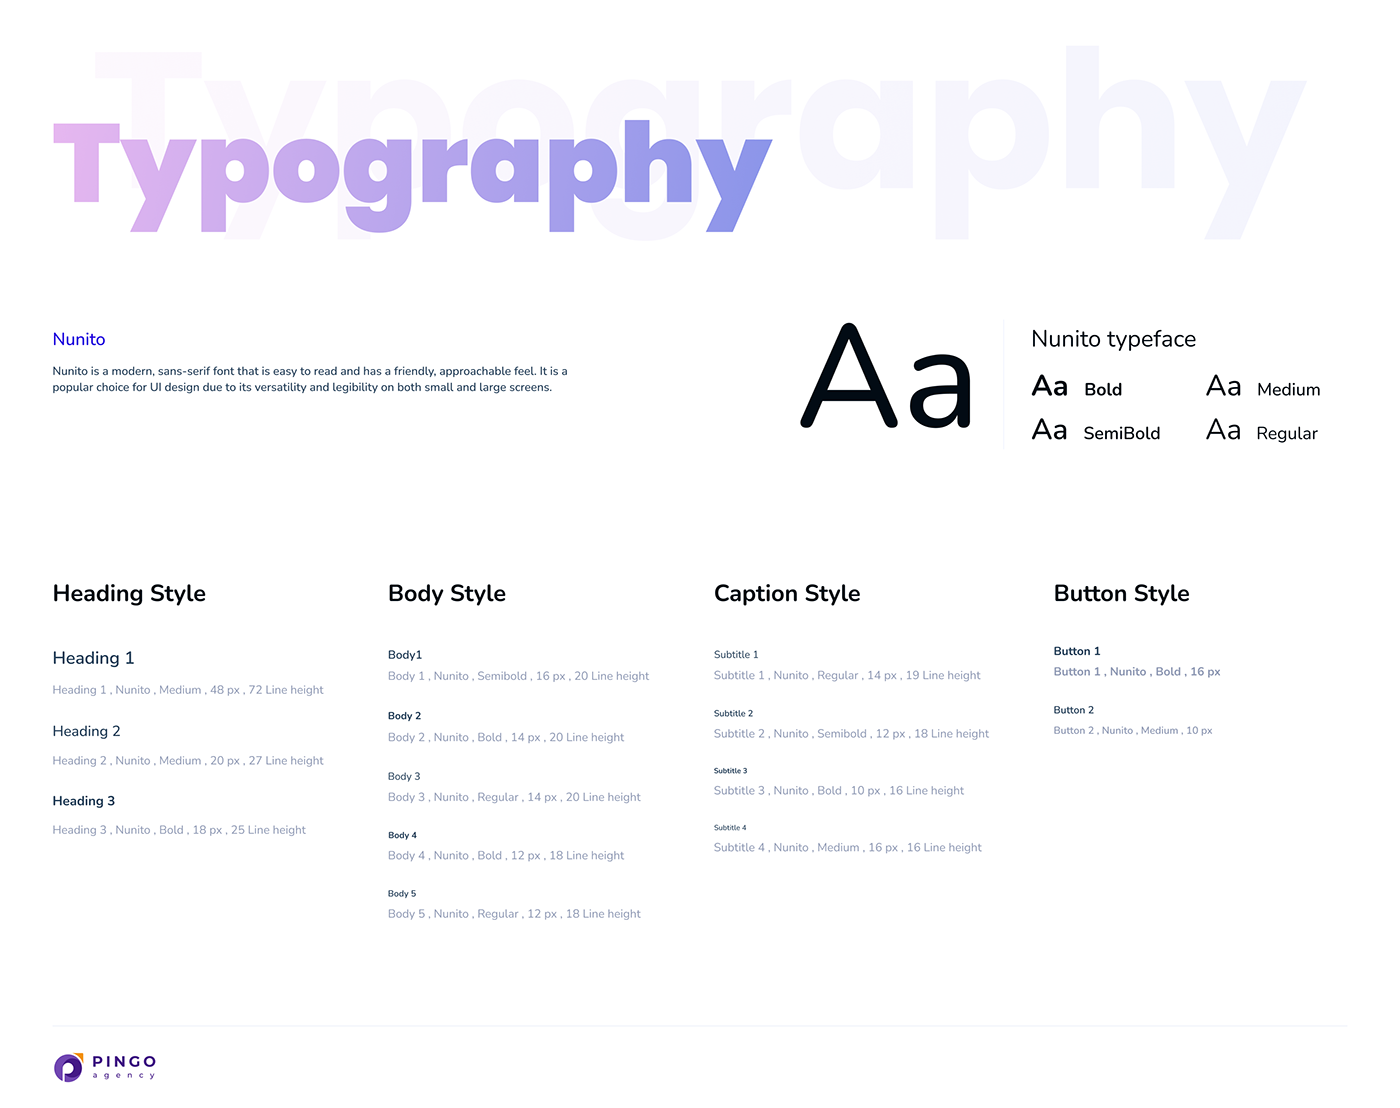 Design system - style guide - color palette - typography - uiux - grid system